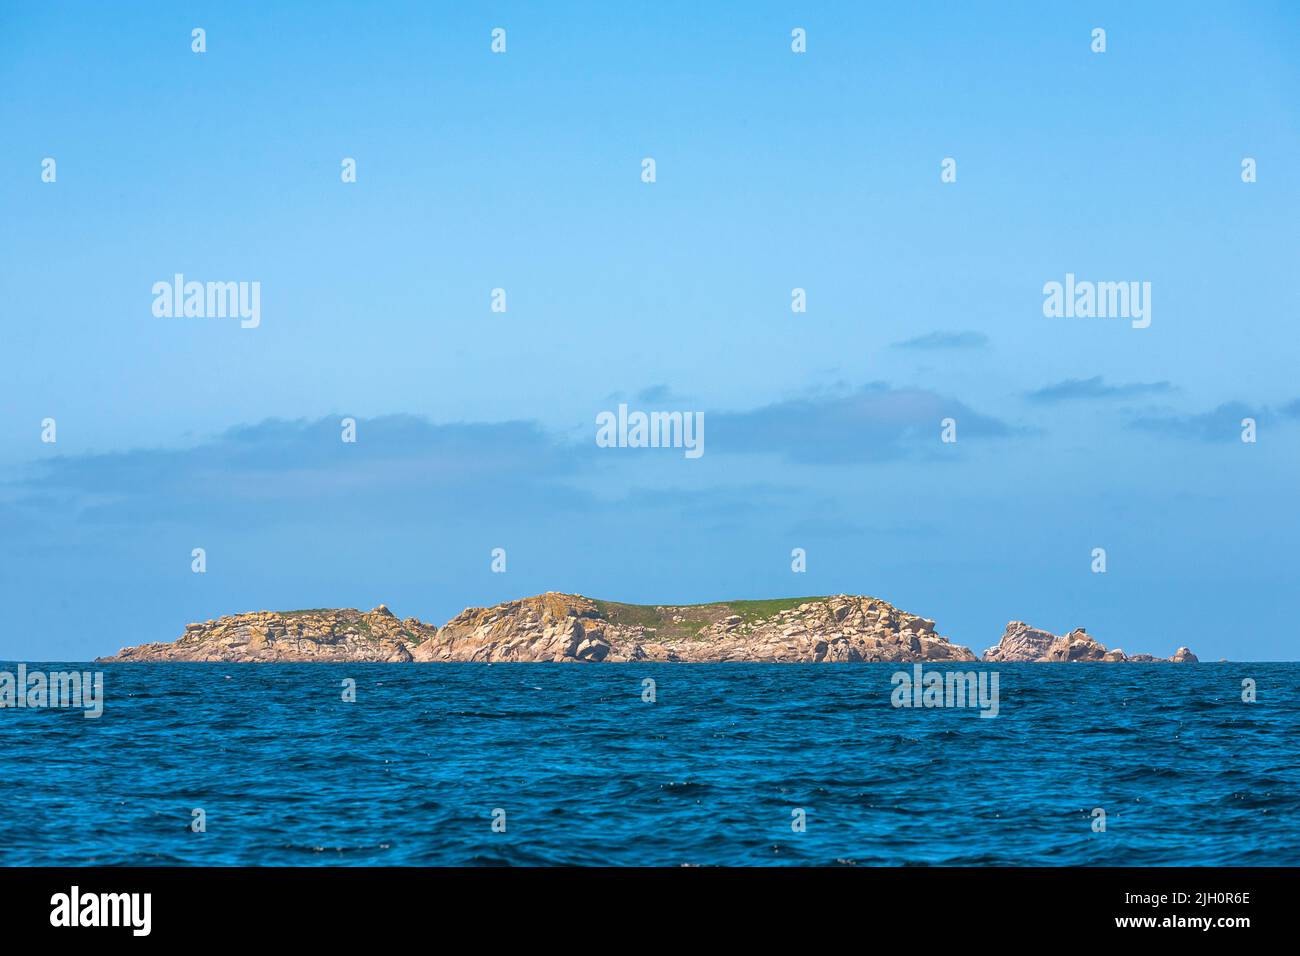 Approaching the Isles of Scilly by sea: the Eastern Isles including Menawethan and Great Ganilly, Isles of Scilly, UK Stock Photo